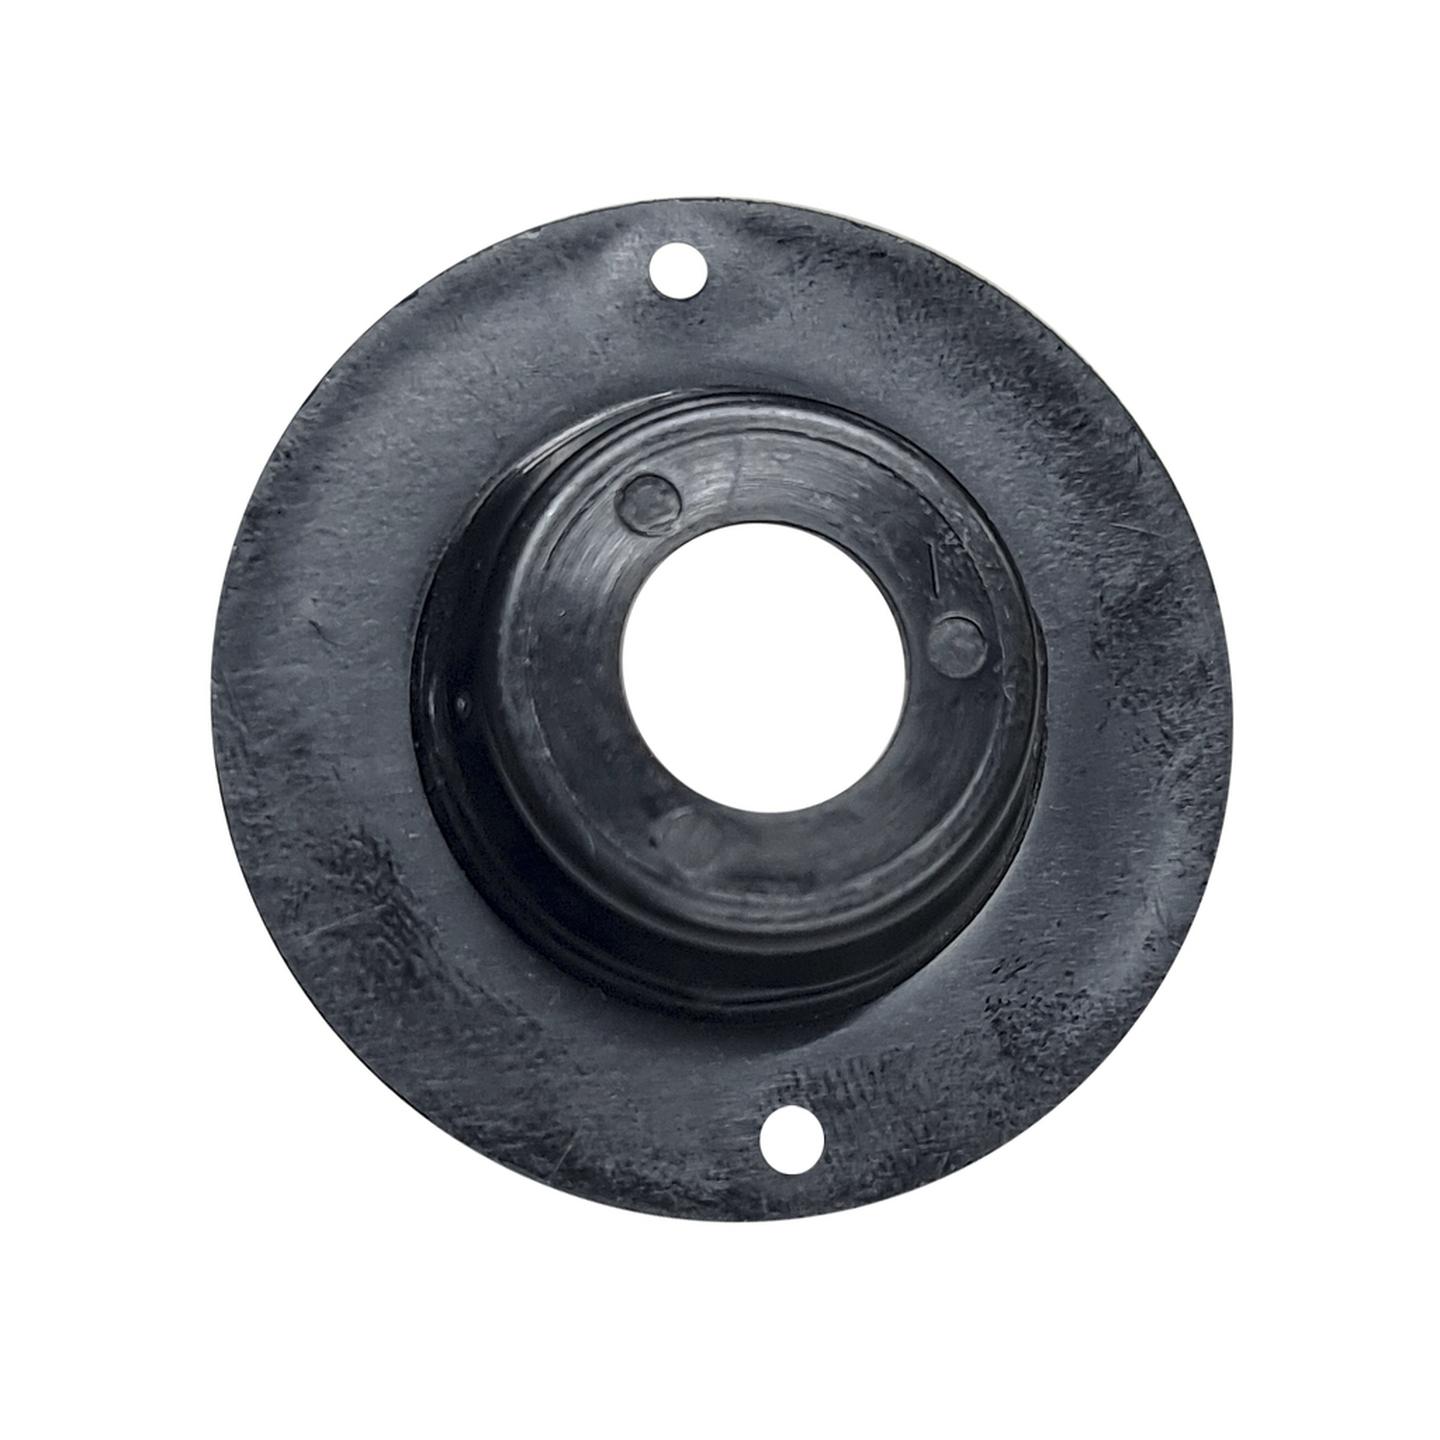 6.5mm Socket Mounting Cup